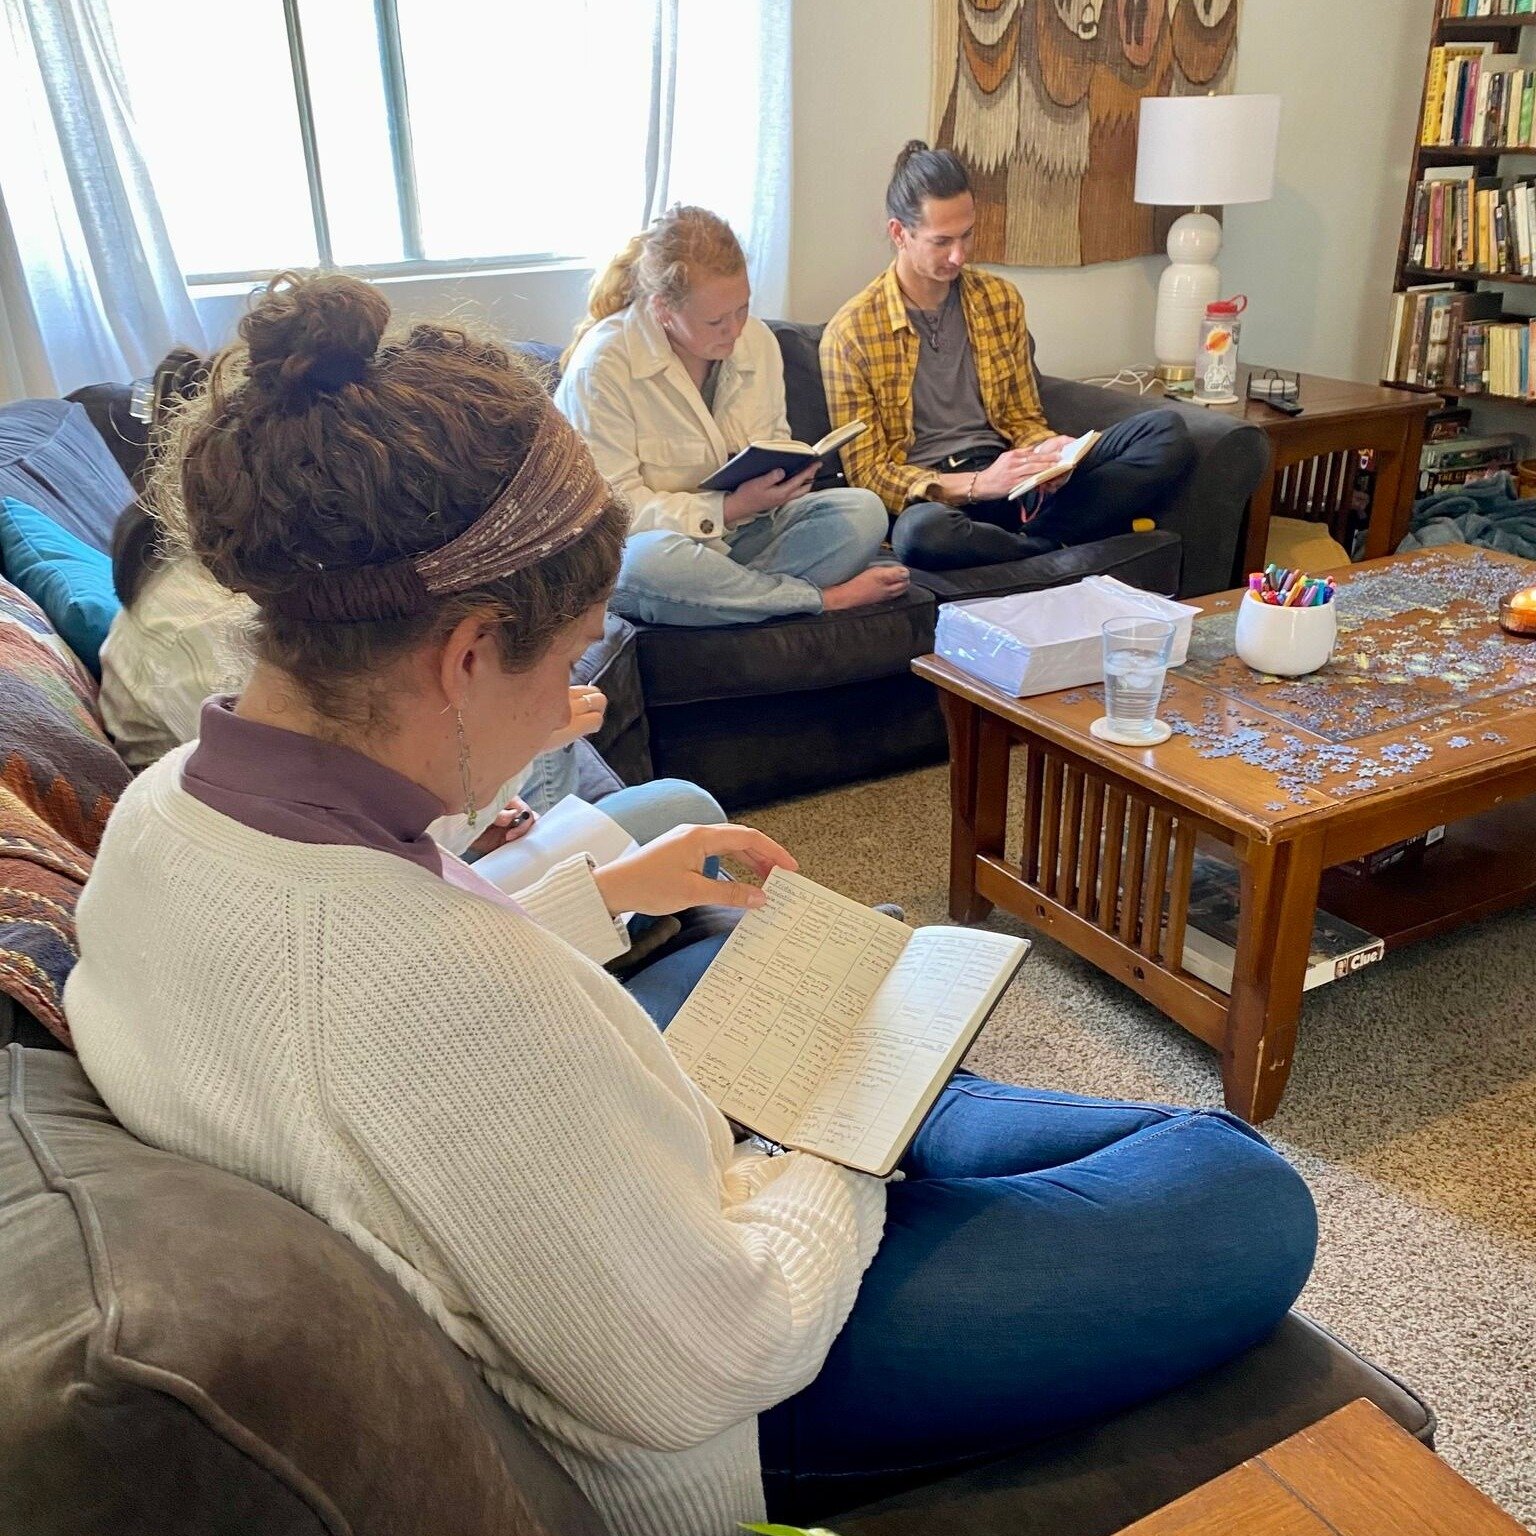 Vocational discernment time! Today's goal: write a personal mission statement. While a daunting task for sure, it was made manageable in the capable hands of our facilitator, Alison Wood. Spending time journaling, considering our values, and hearing 